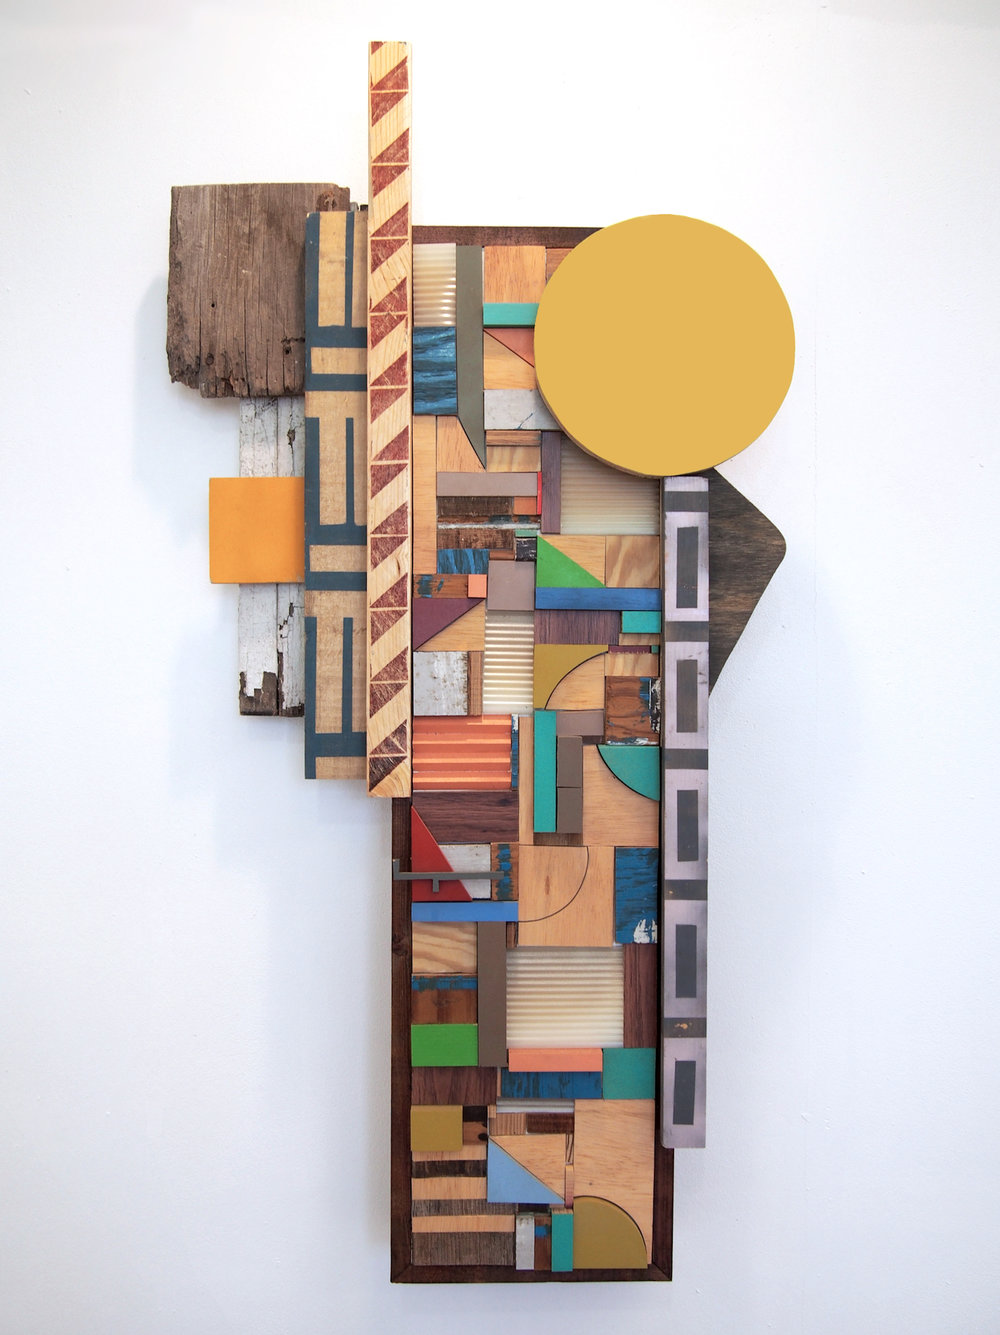  40x23x6 , wood, plastic, stain, acrylic paint, ink, 40 x 23 x 6 inches 